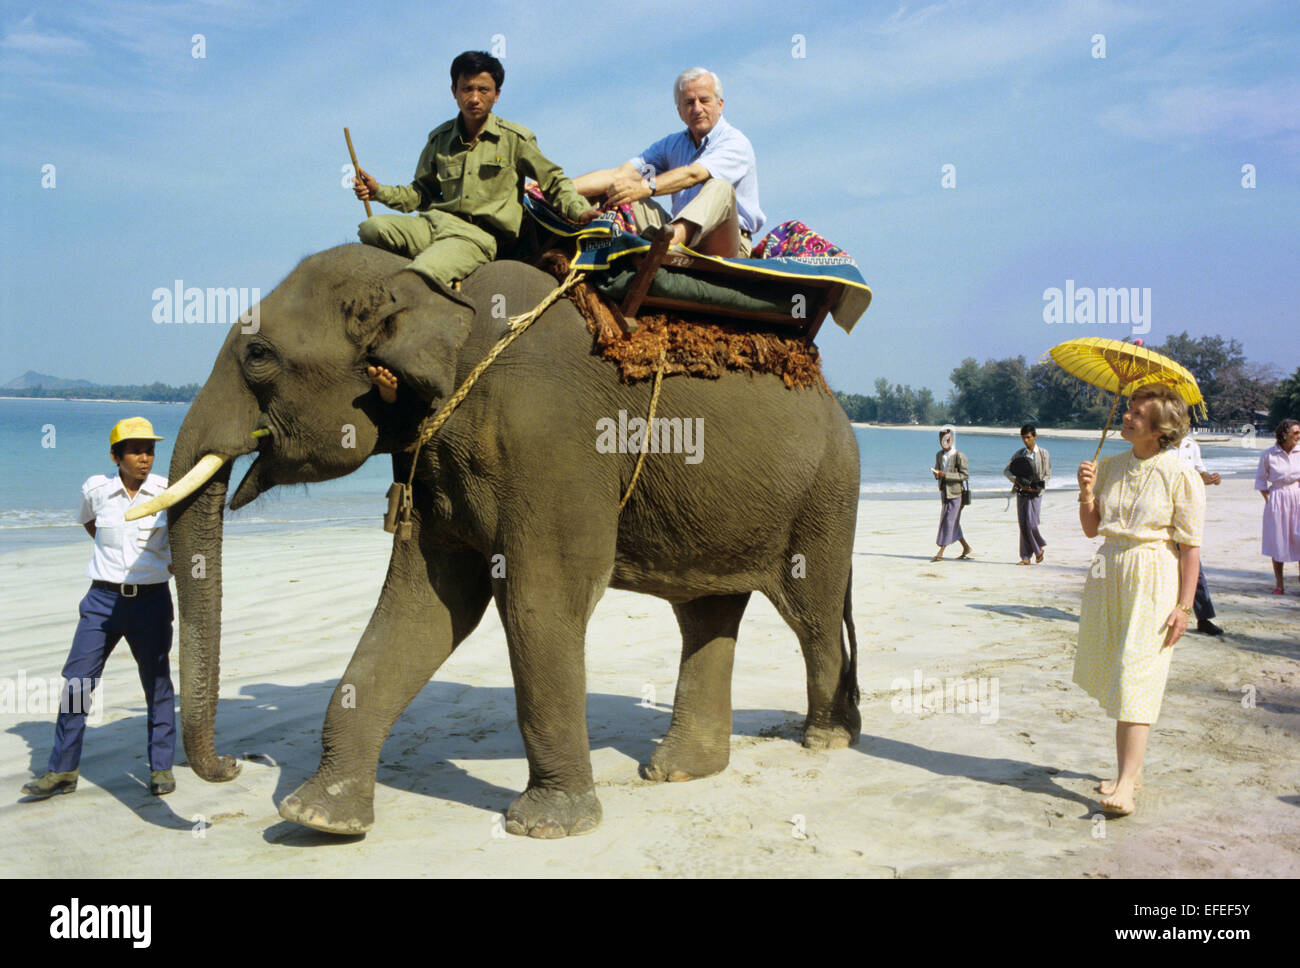 FILE - A file picture dated 10 February 1986 shows the late former German President Richard von Weizsaecker riding an elephant on the beach in Sandoway, Myanmar. To the right his wife Marianne stands with a yellow umbrella. Von Weizsaecker died on 30 January 2015 at the age of 94. Photo: MARTIN ATHENSTAEDT/dpa Stock Photo